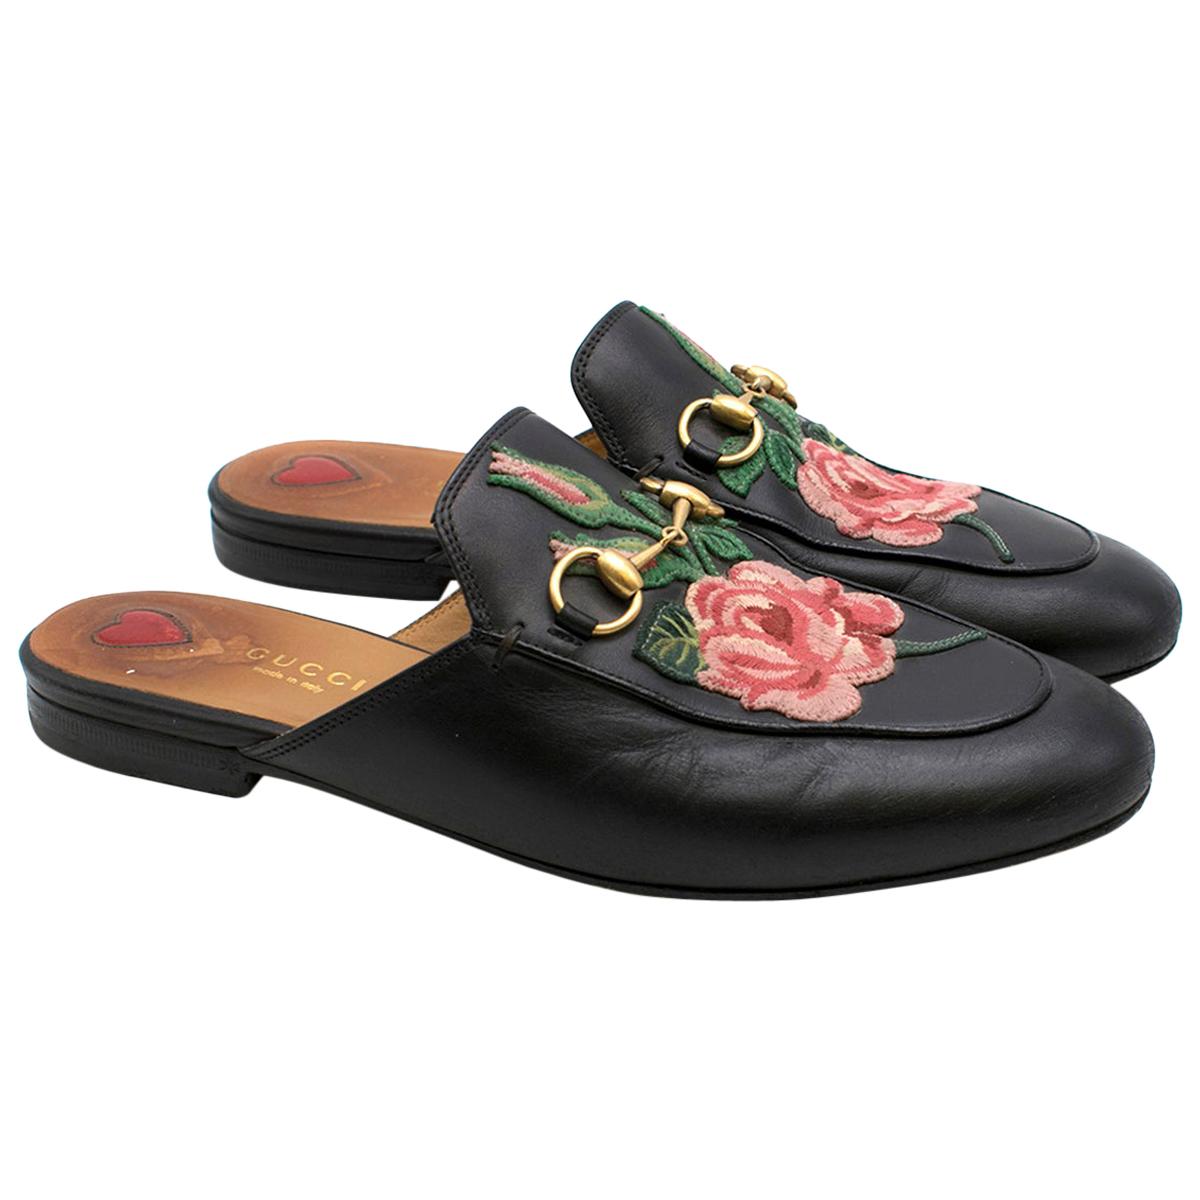 Gucci Black Rose Embroidered Princetown Slippers 37.5